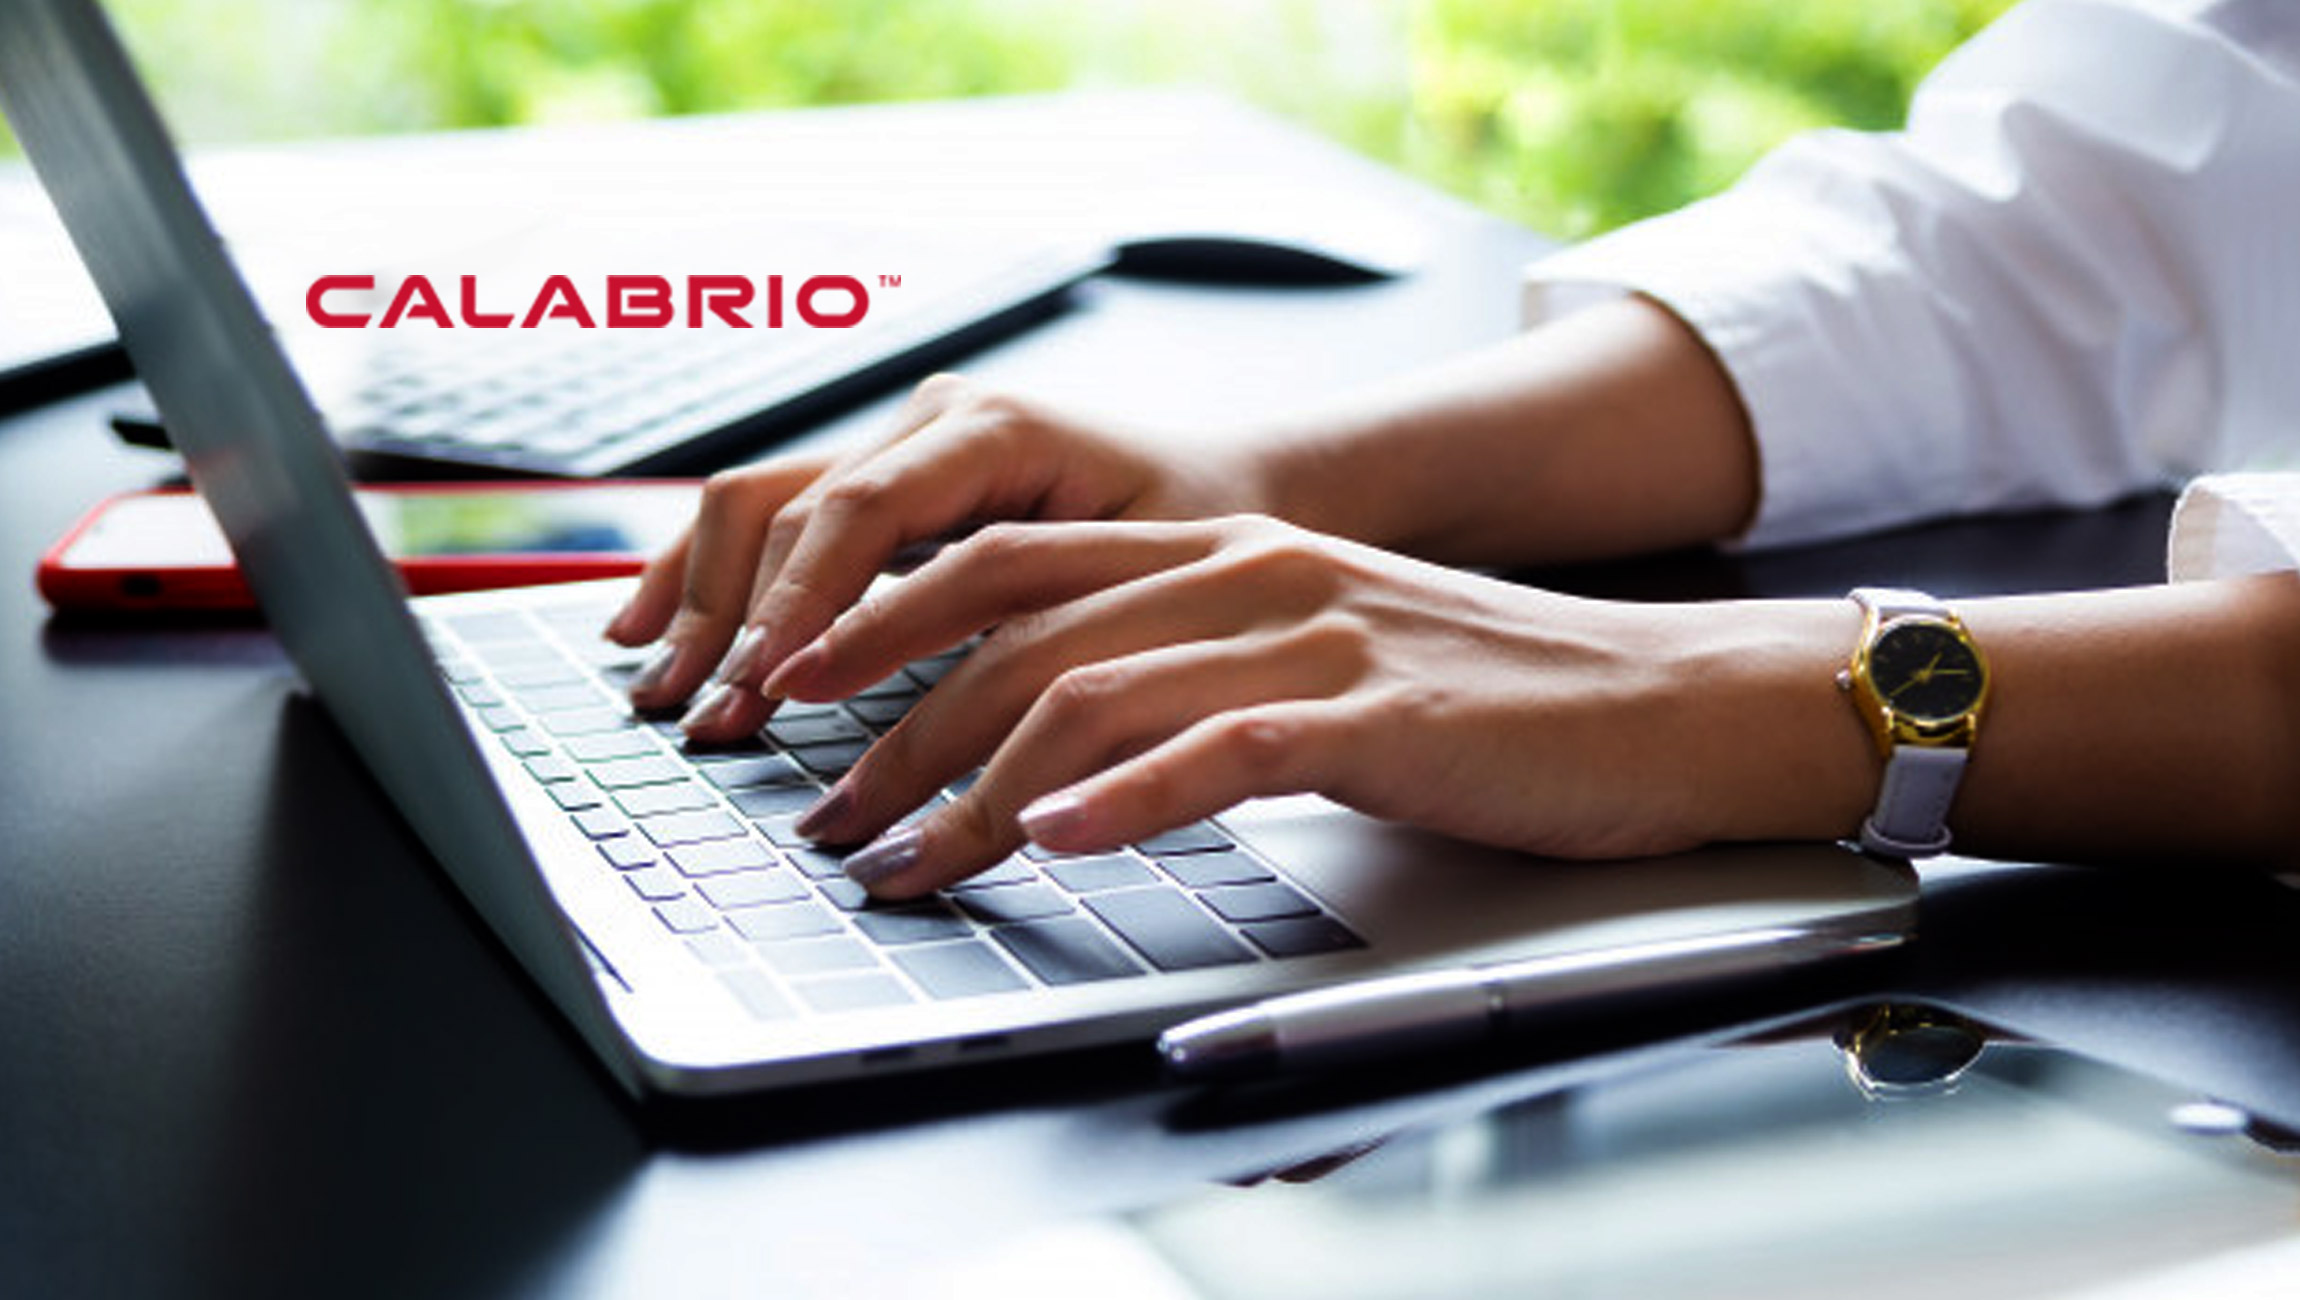 Calabrio Unveils New Platform for a New Era of Workforce and Customer Engagement